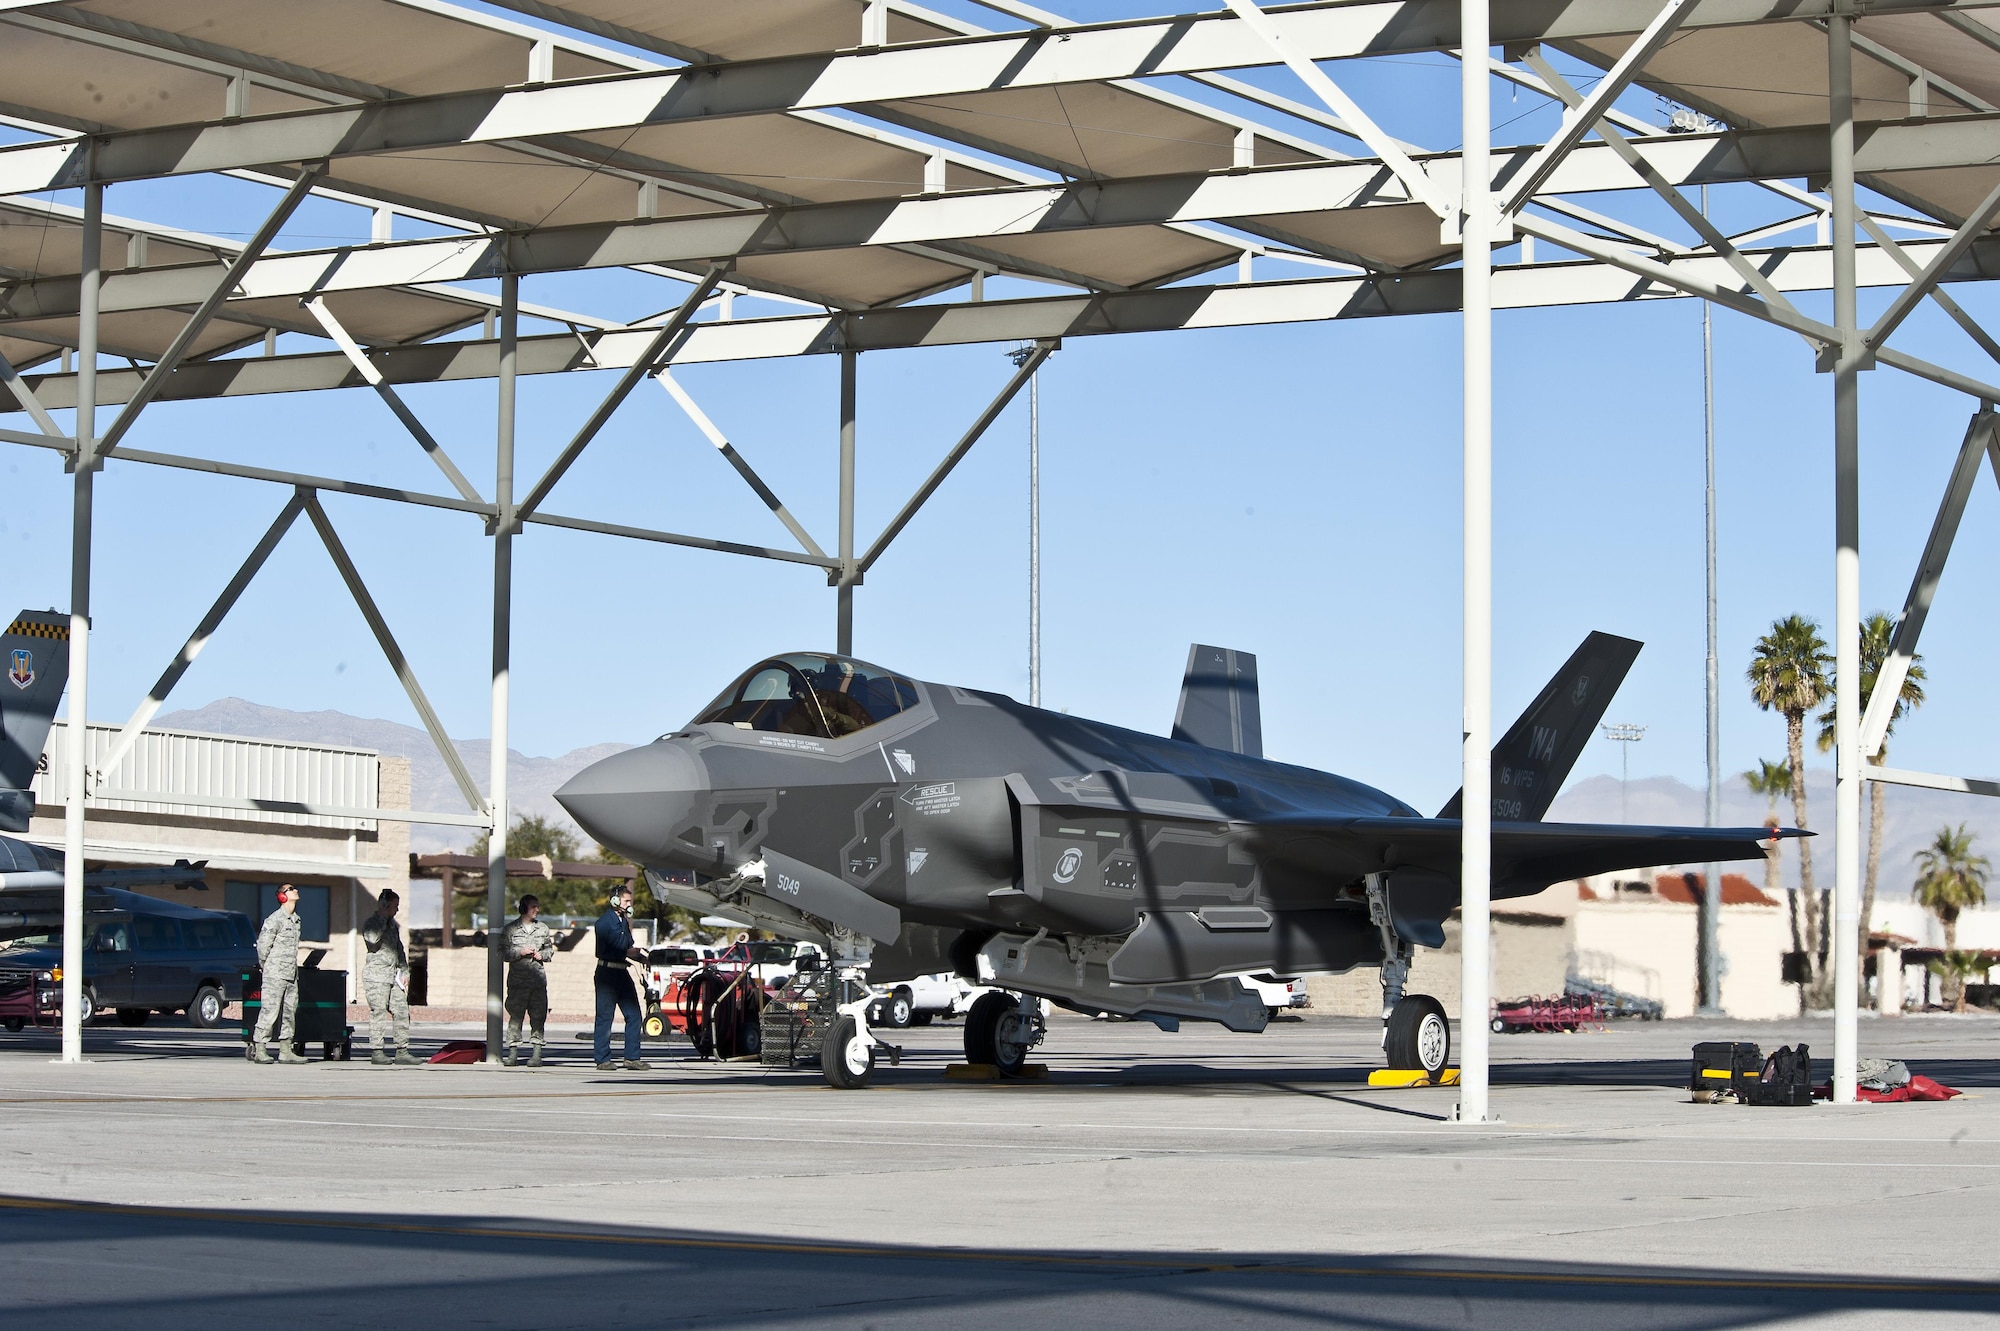 An F-35 sits under a sun shade on the flightline at Nellis Air Force Base, Nev. The Air Force Small Business Innovation Research/Small Business Technology Transfer program office and a small business partner have developed high-temperature, abrasion-resistant coating to improve reliability and maintainability. The F-35 is but one of the weapon systems to benefit from this technology. (Air Force photo by Airman by 1st Class Mikaley Towle) 